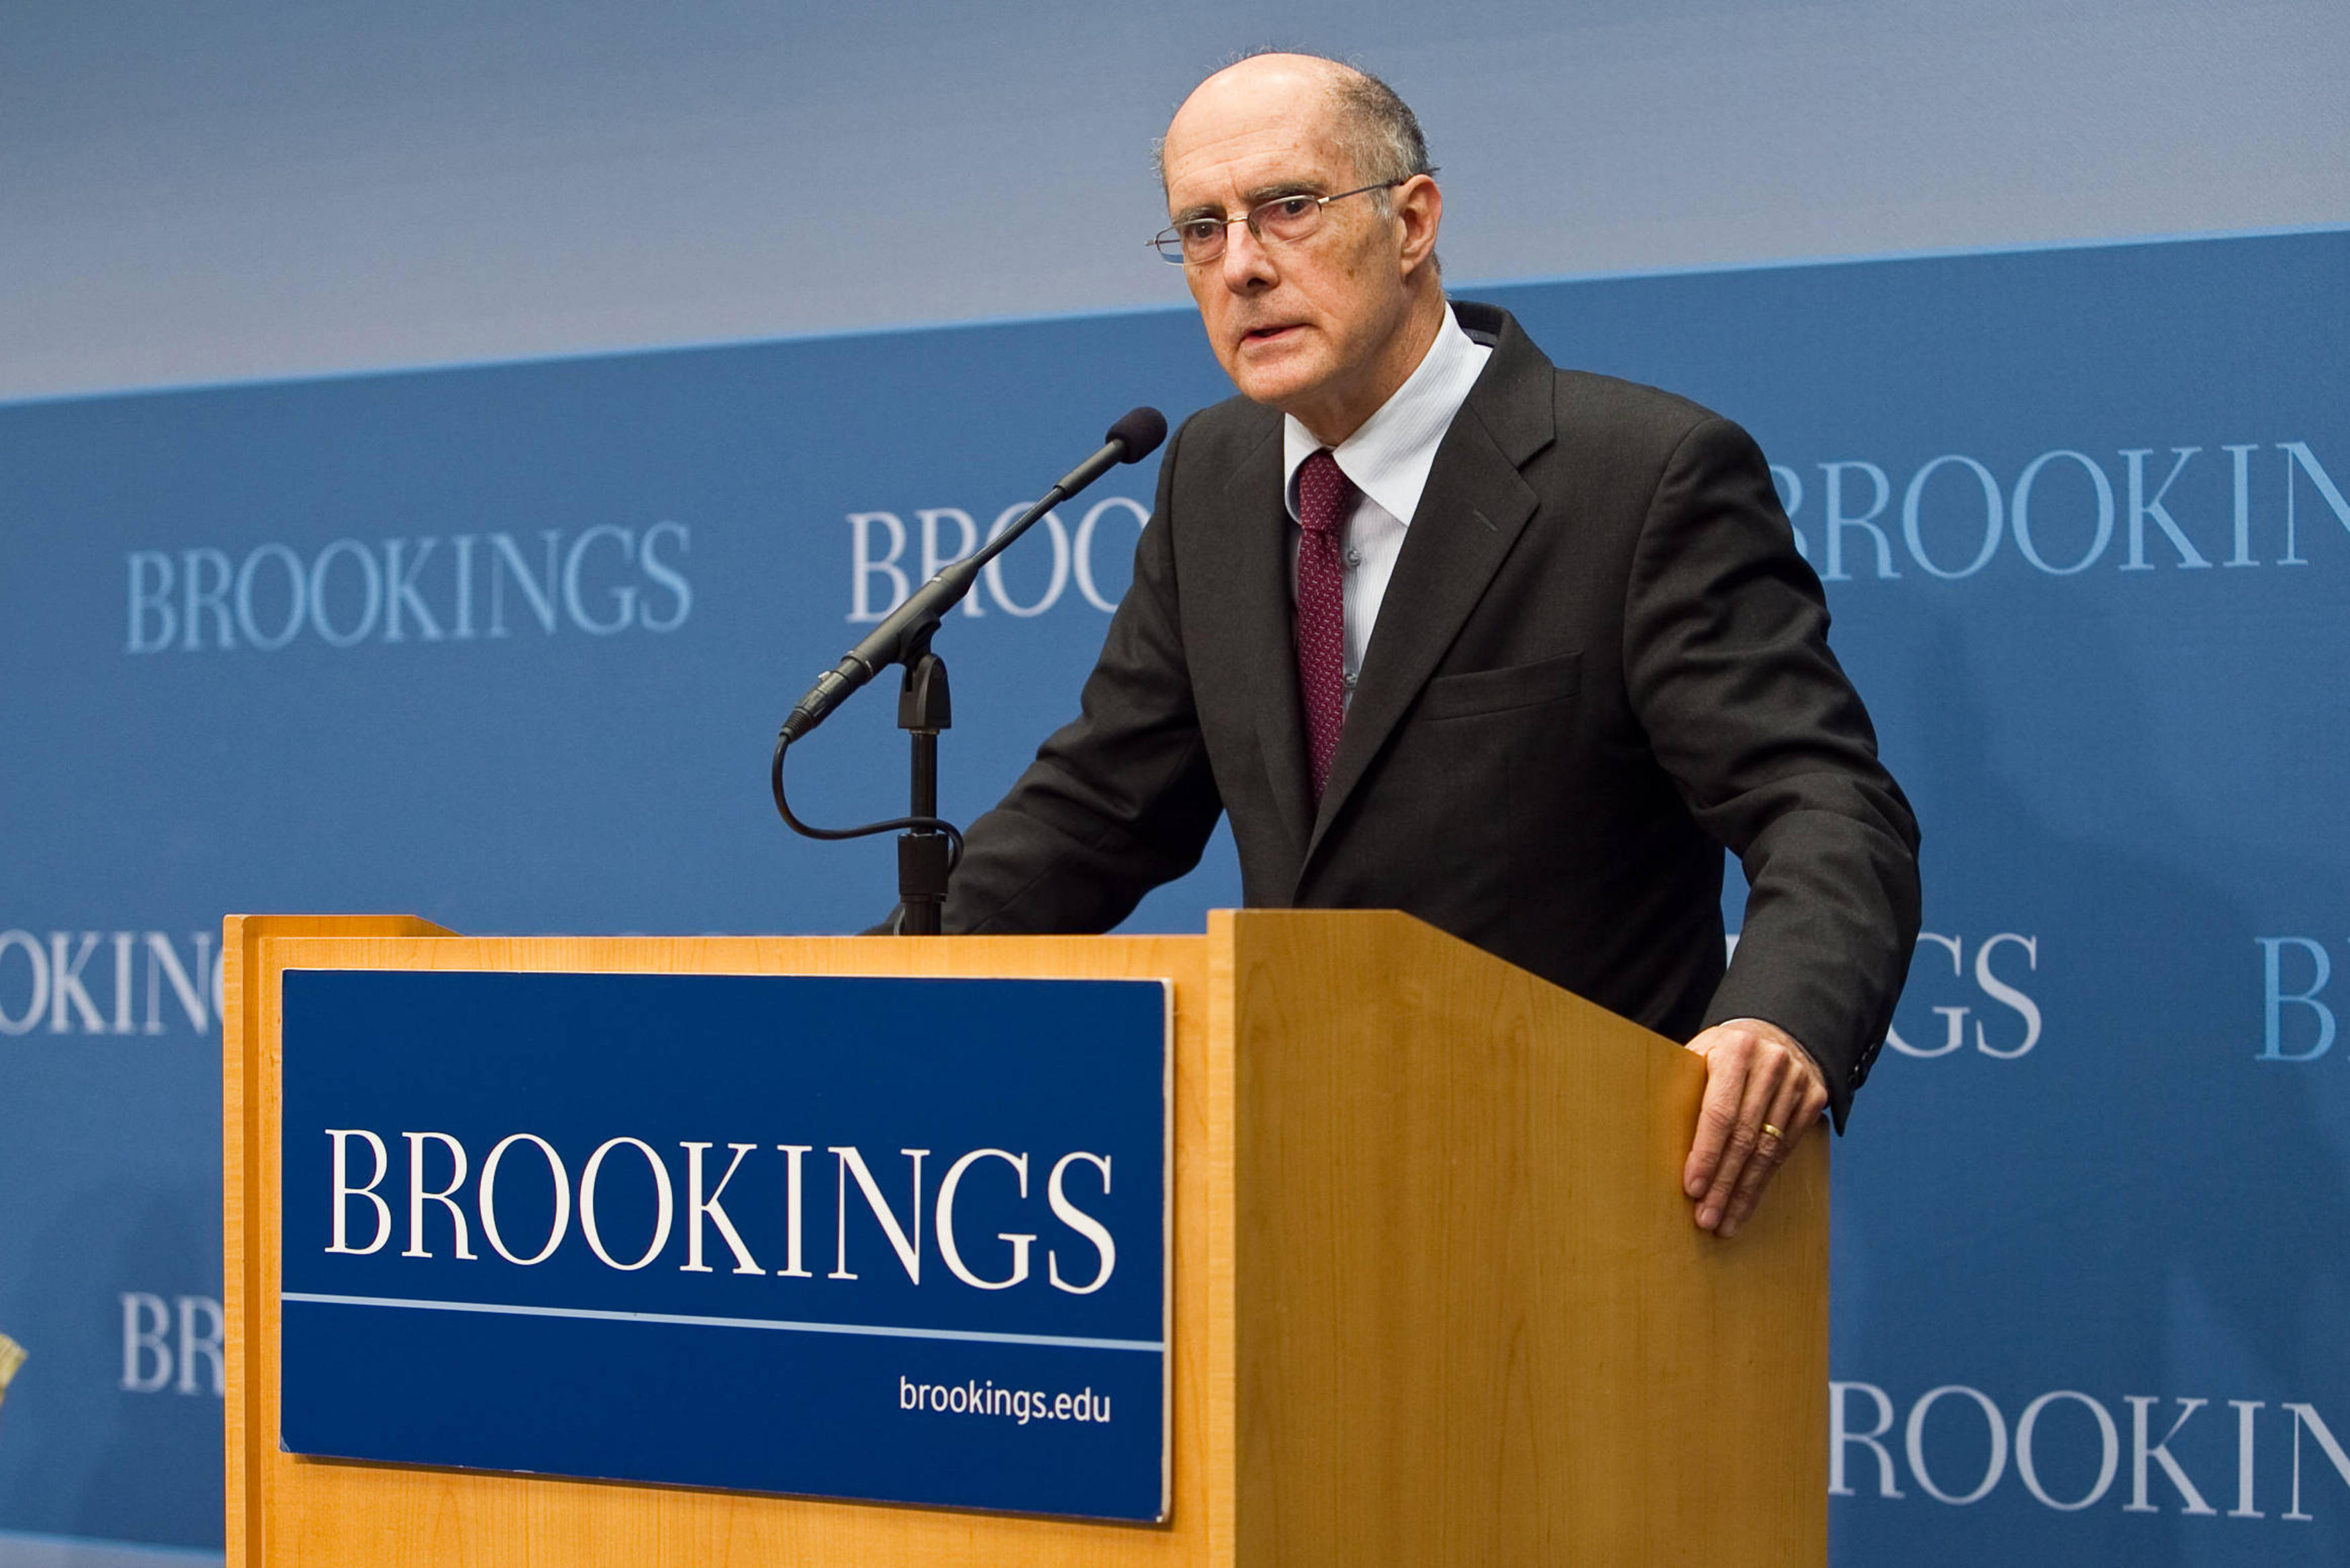 Strobe Talbott to step down from the Brookings Institution